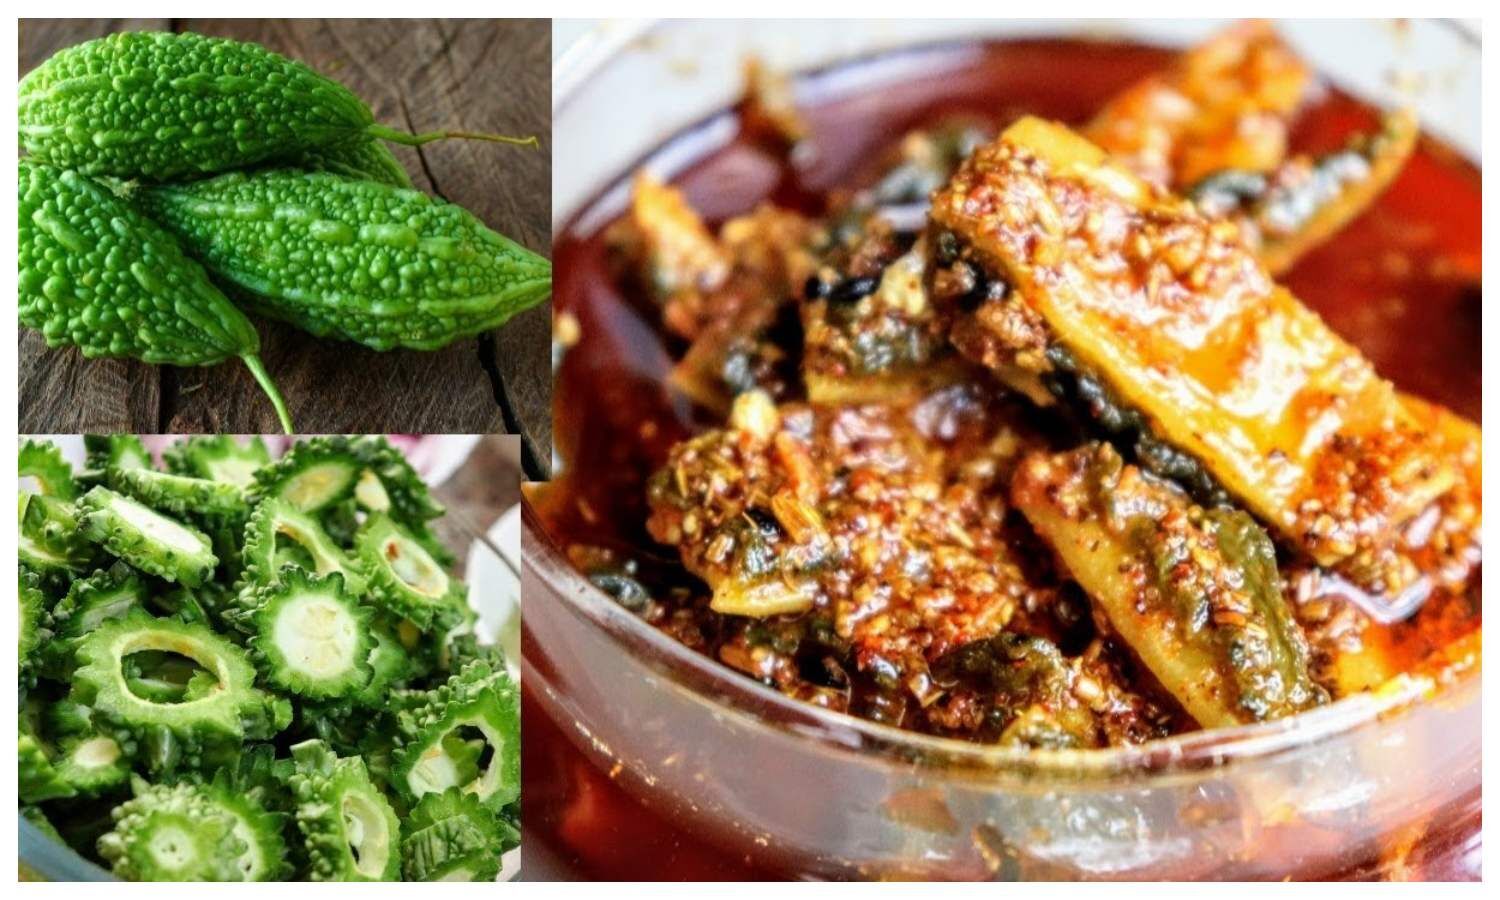 Karela Achar For Diabetes: Bitter gourd pickle will cure diabetes, know its recipe